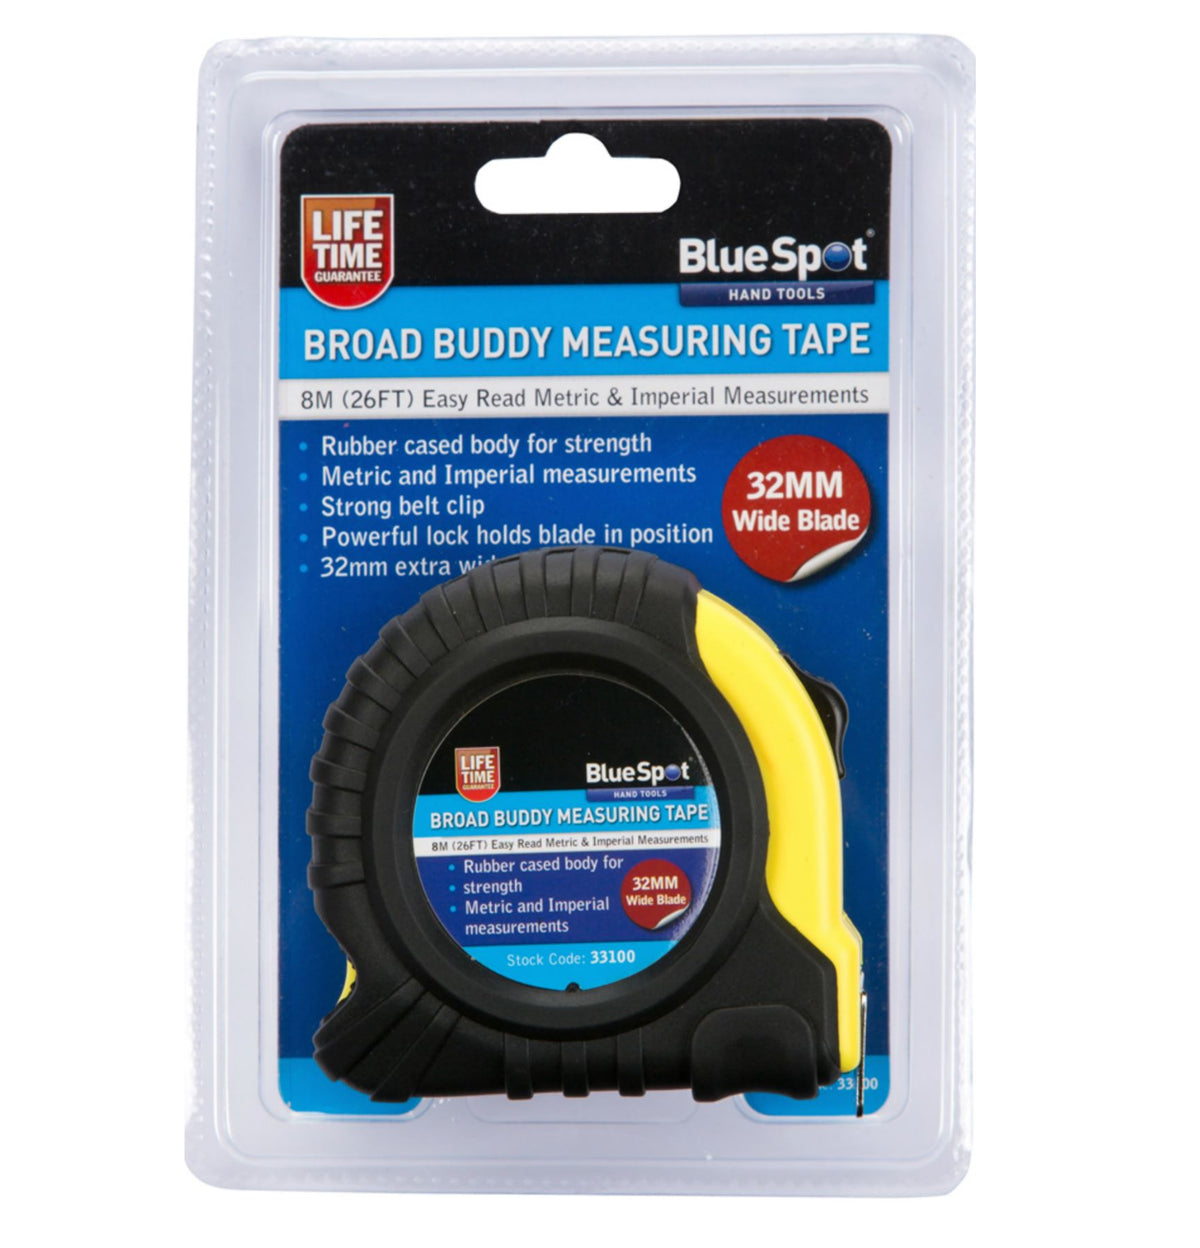 BlueSpot Extra Wide 32mm Blade Tape Measure Imperial Metric Scale 8m Or 10m